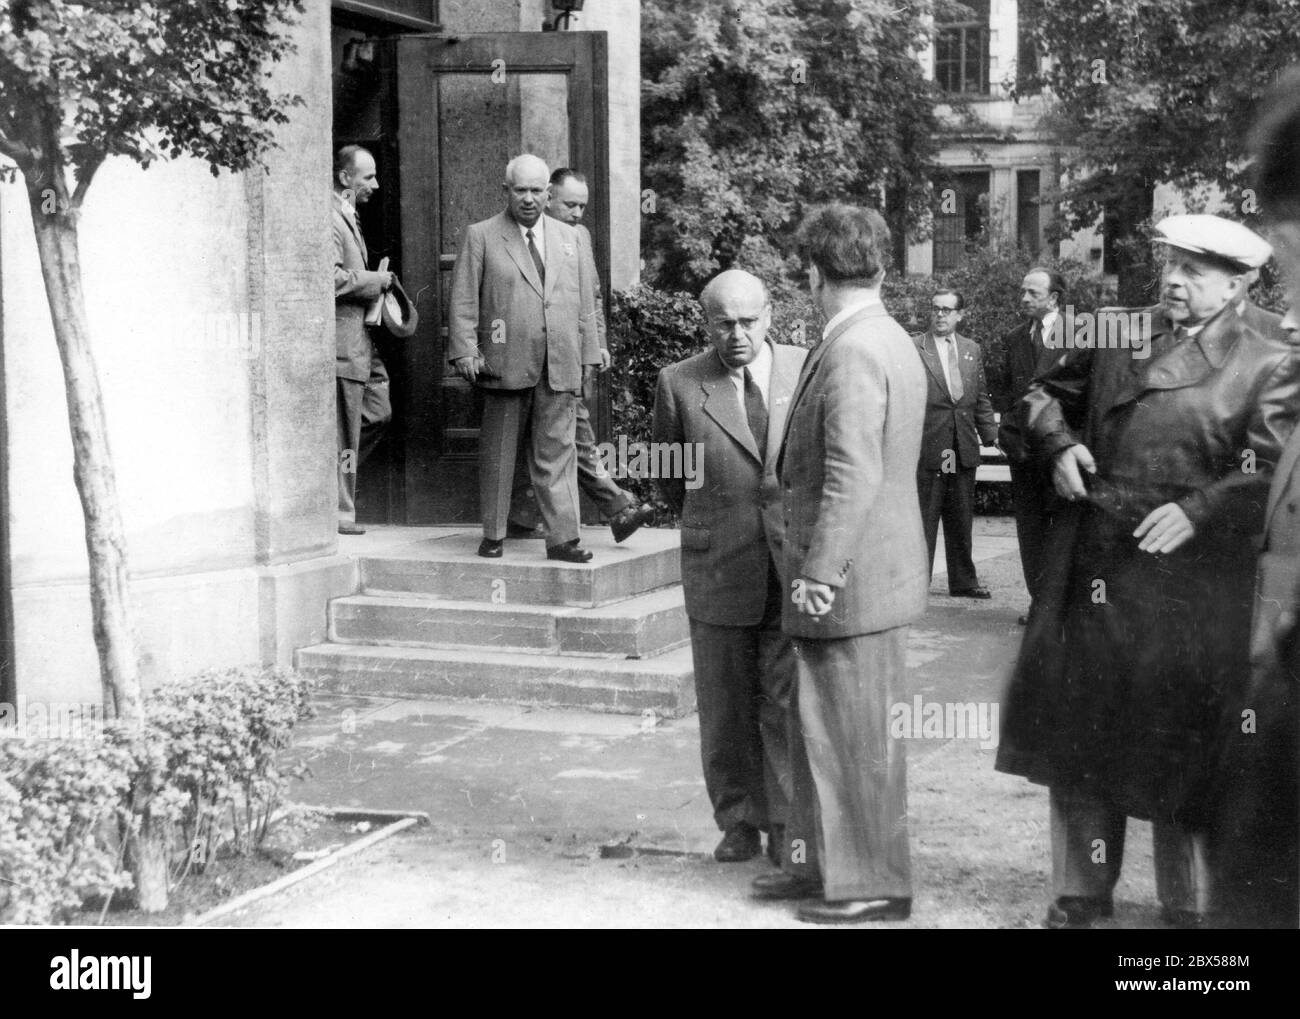 Nikita Sergeyevich Khrushchev - (* 1894 - 1971) - Visit of the Soviet party leader in East Germany in 1958, Khrushchev steps out of the guest house of the GDR government in Leipzig, front right with leather coat and flat cap SED leader Walter Ulbricht, in the center of the image, the head of the Personal Protection of the GDR State Security Lieutenant General Franz Gold. Stock Photo